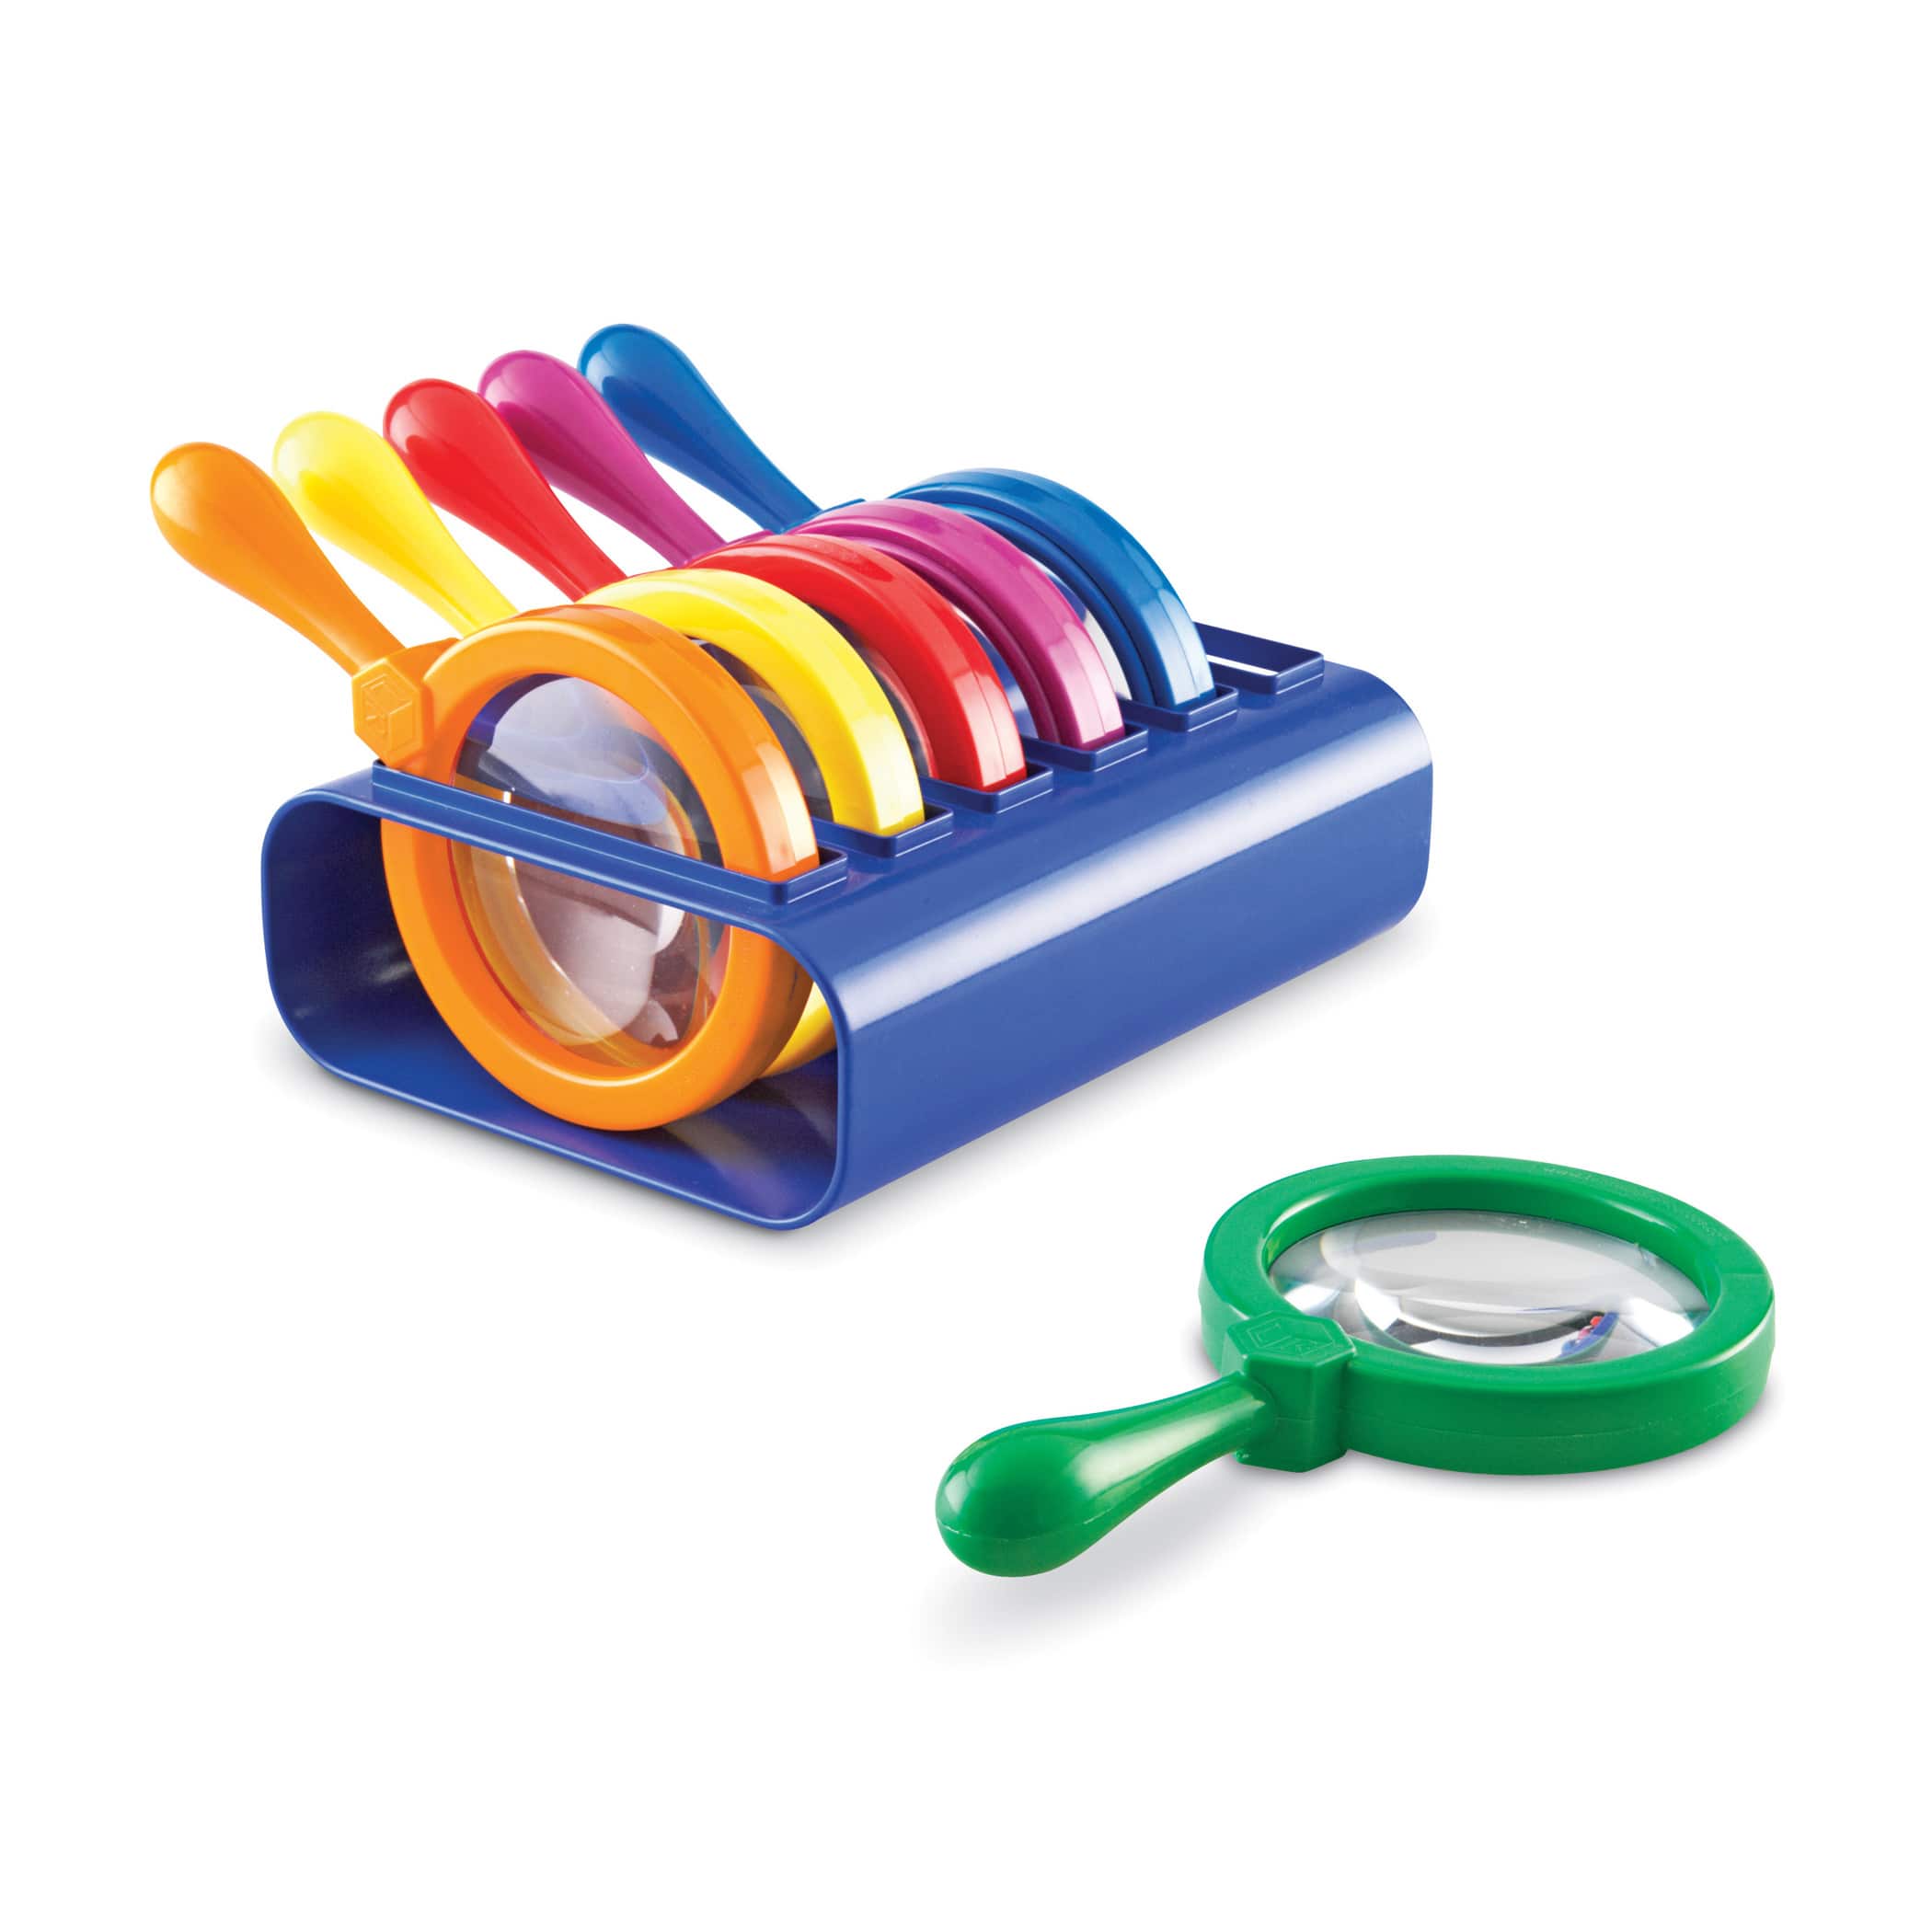 Primary Science Jumbo Magnifiers, Set of 6